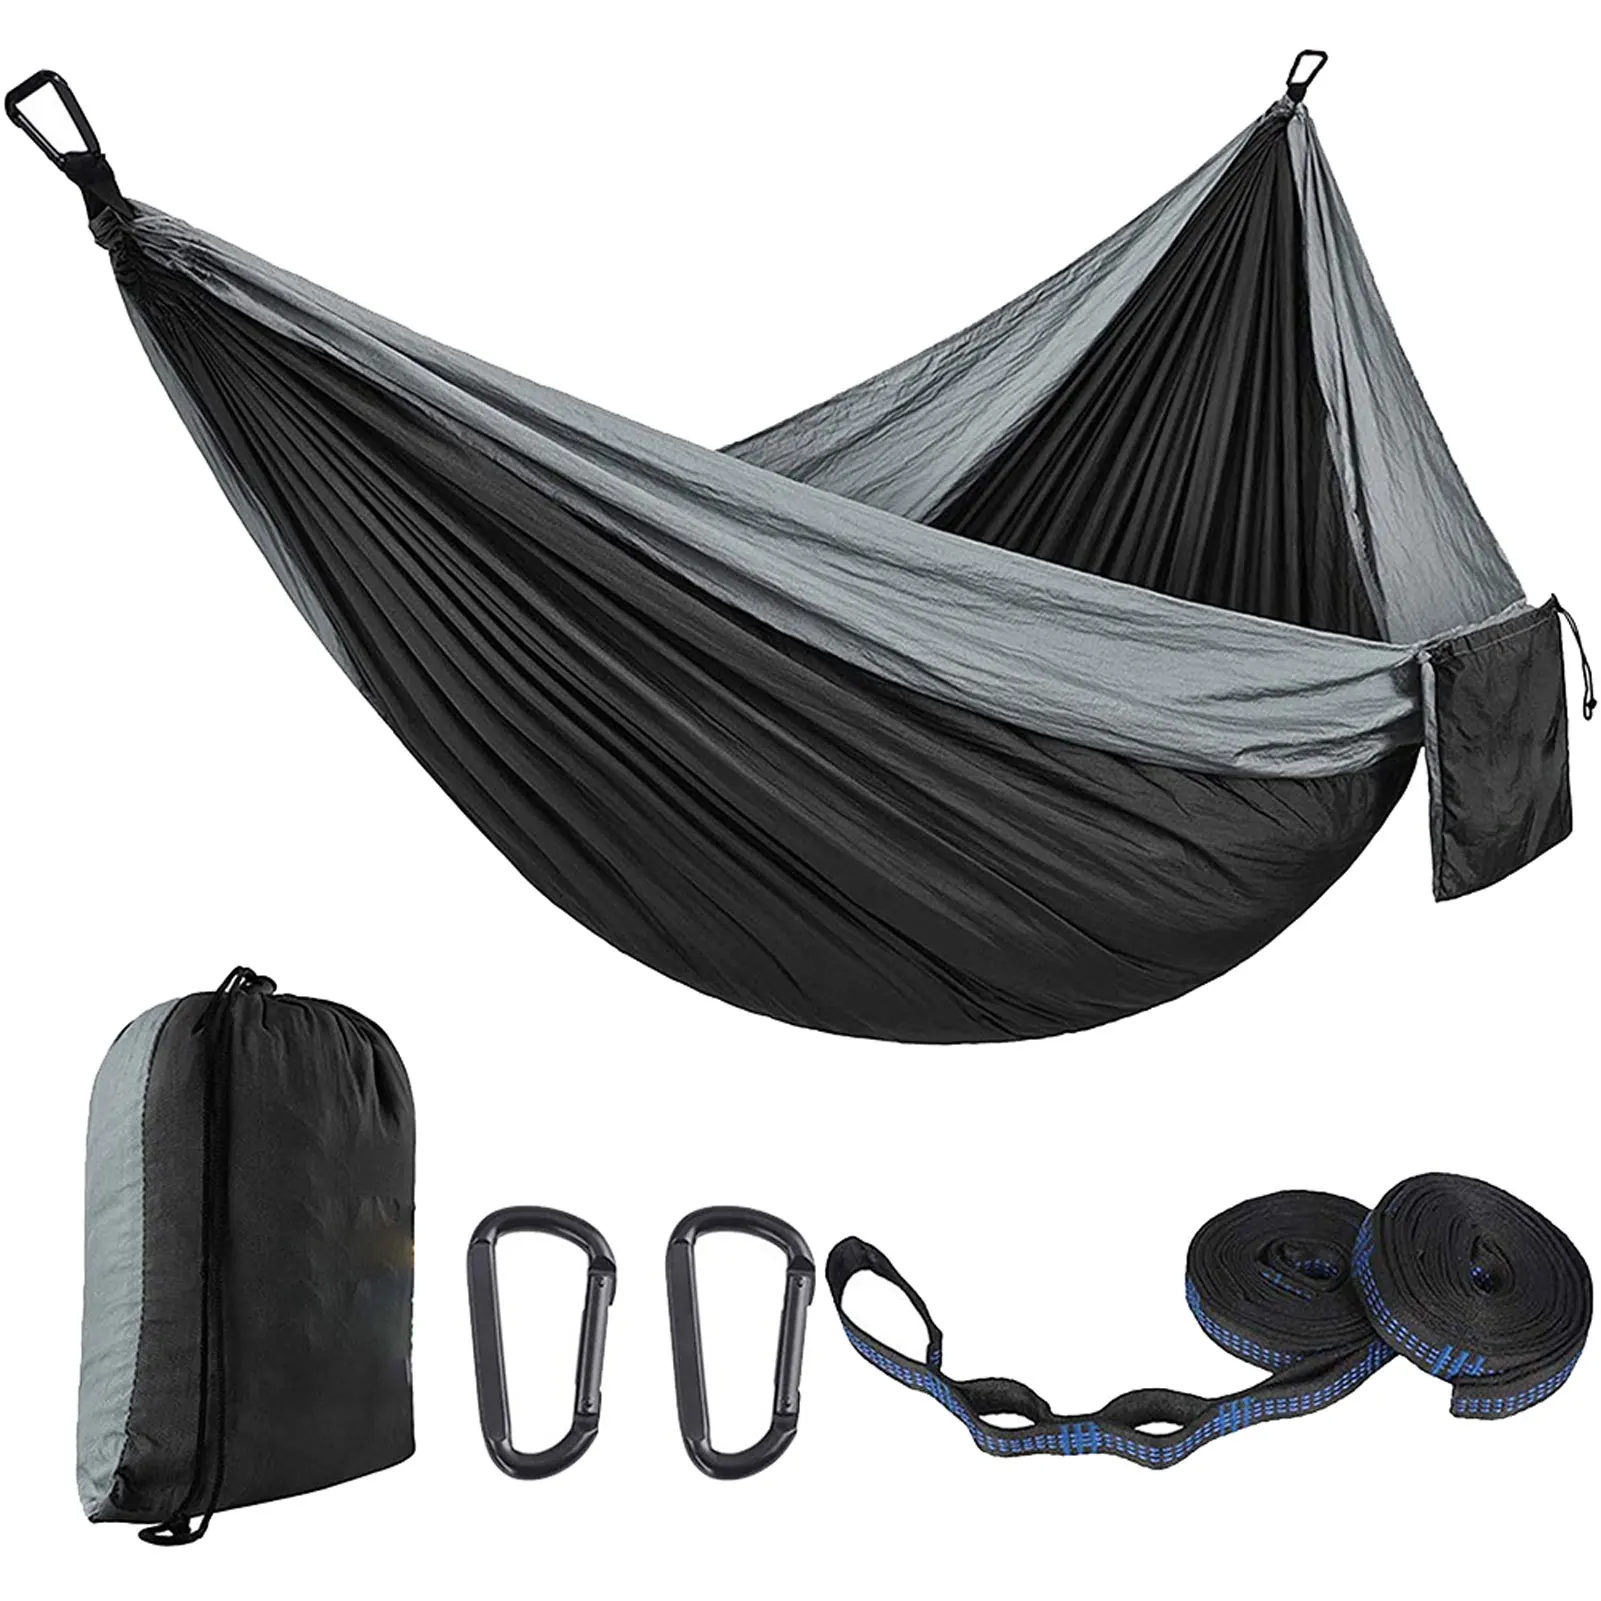 Wear Resistant Camping Hammock Hiking With Tree Straps Beach Backpacking Indoor Outdoor Quick Drying Portable Easy Set Up Travel